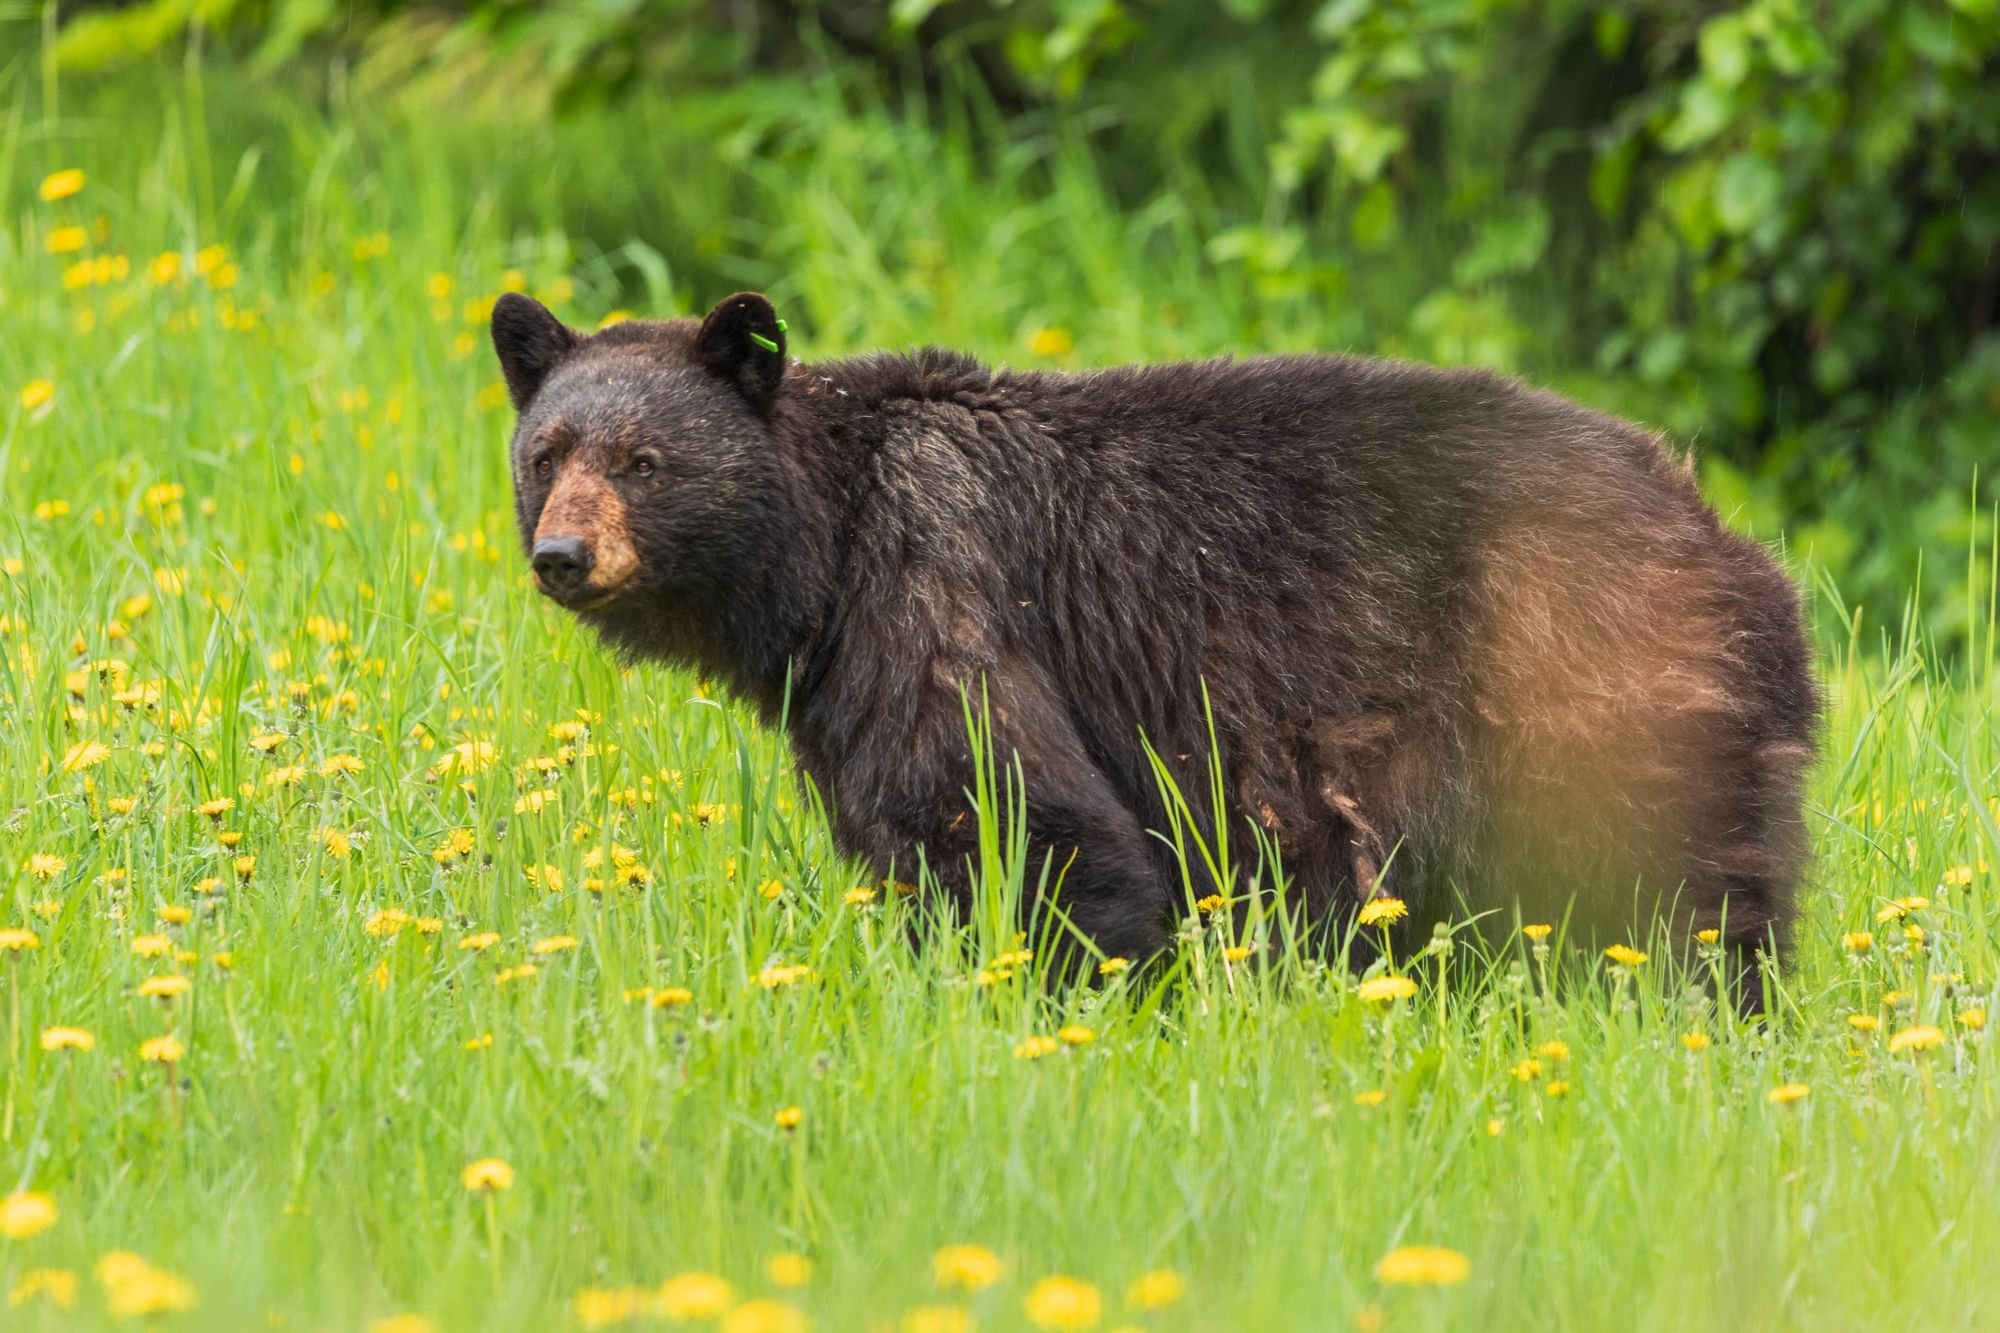 Close-up of a wild bear on grassy ground near Blackcomb Springs Suites